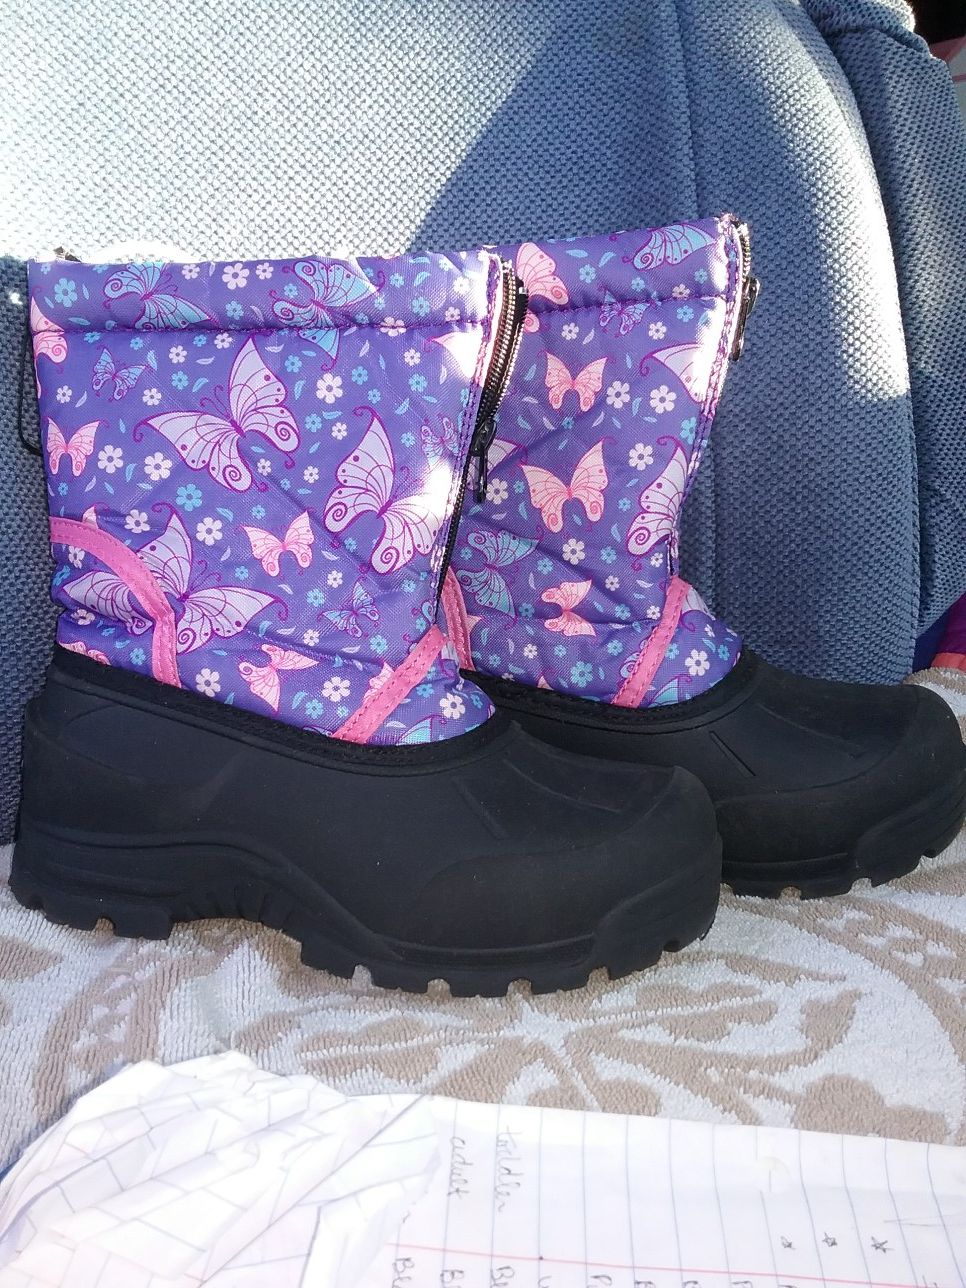 Snow boots, size 2 kids, like new